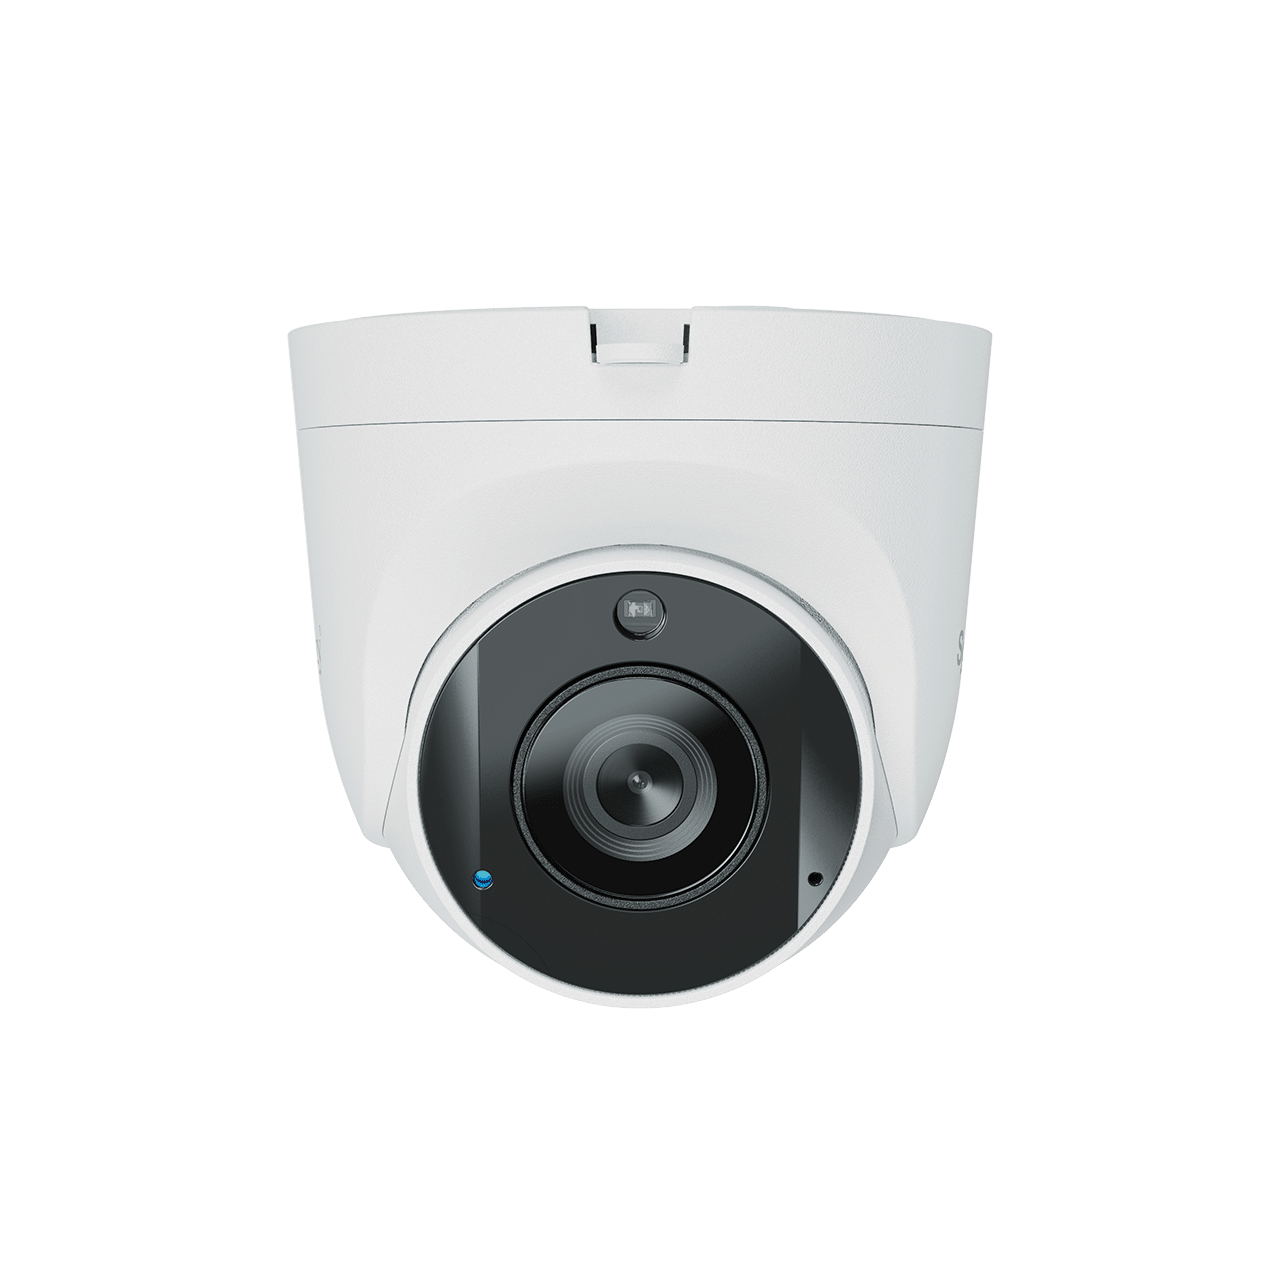 Synology's New Surveillance Cameras - BC500 Review - No License